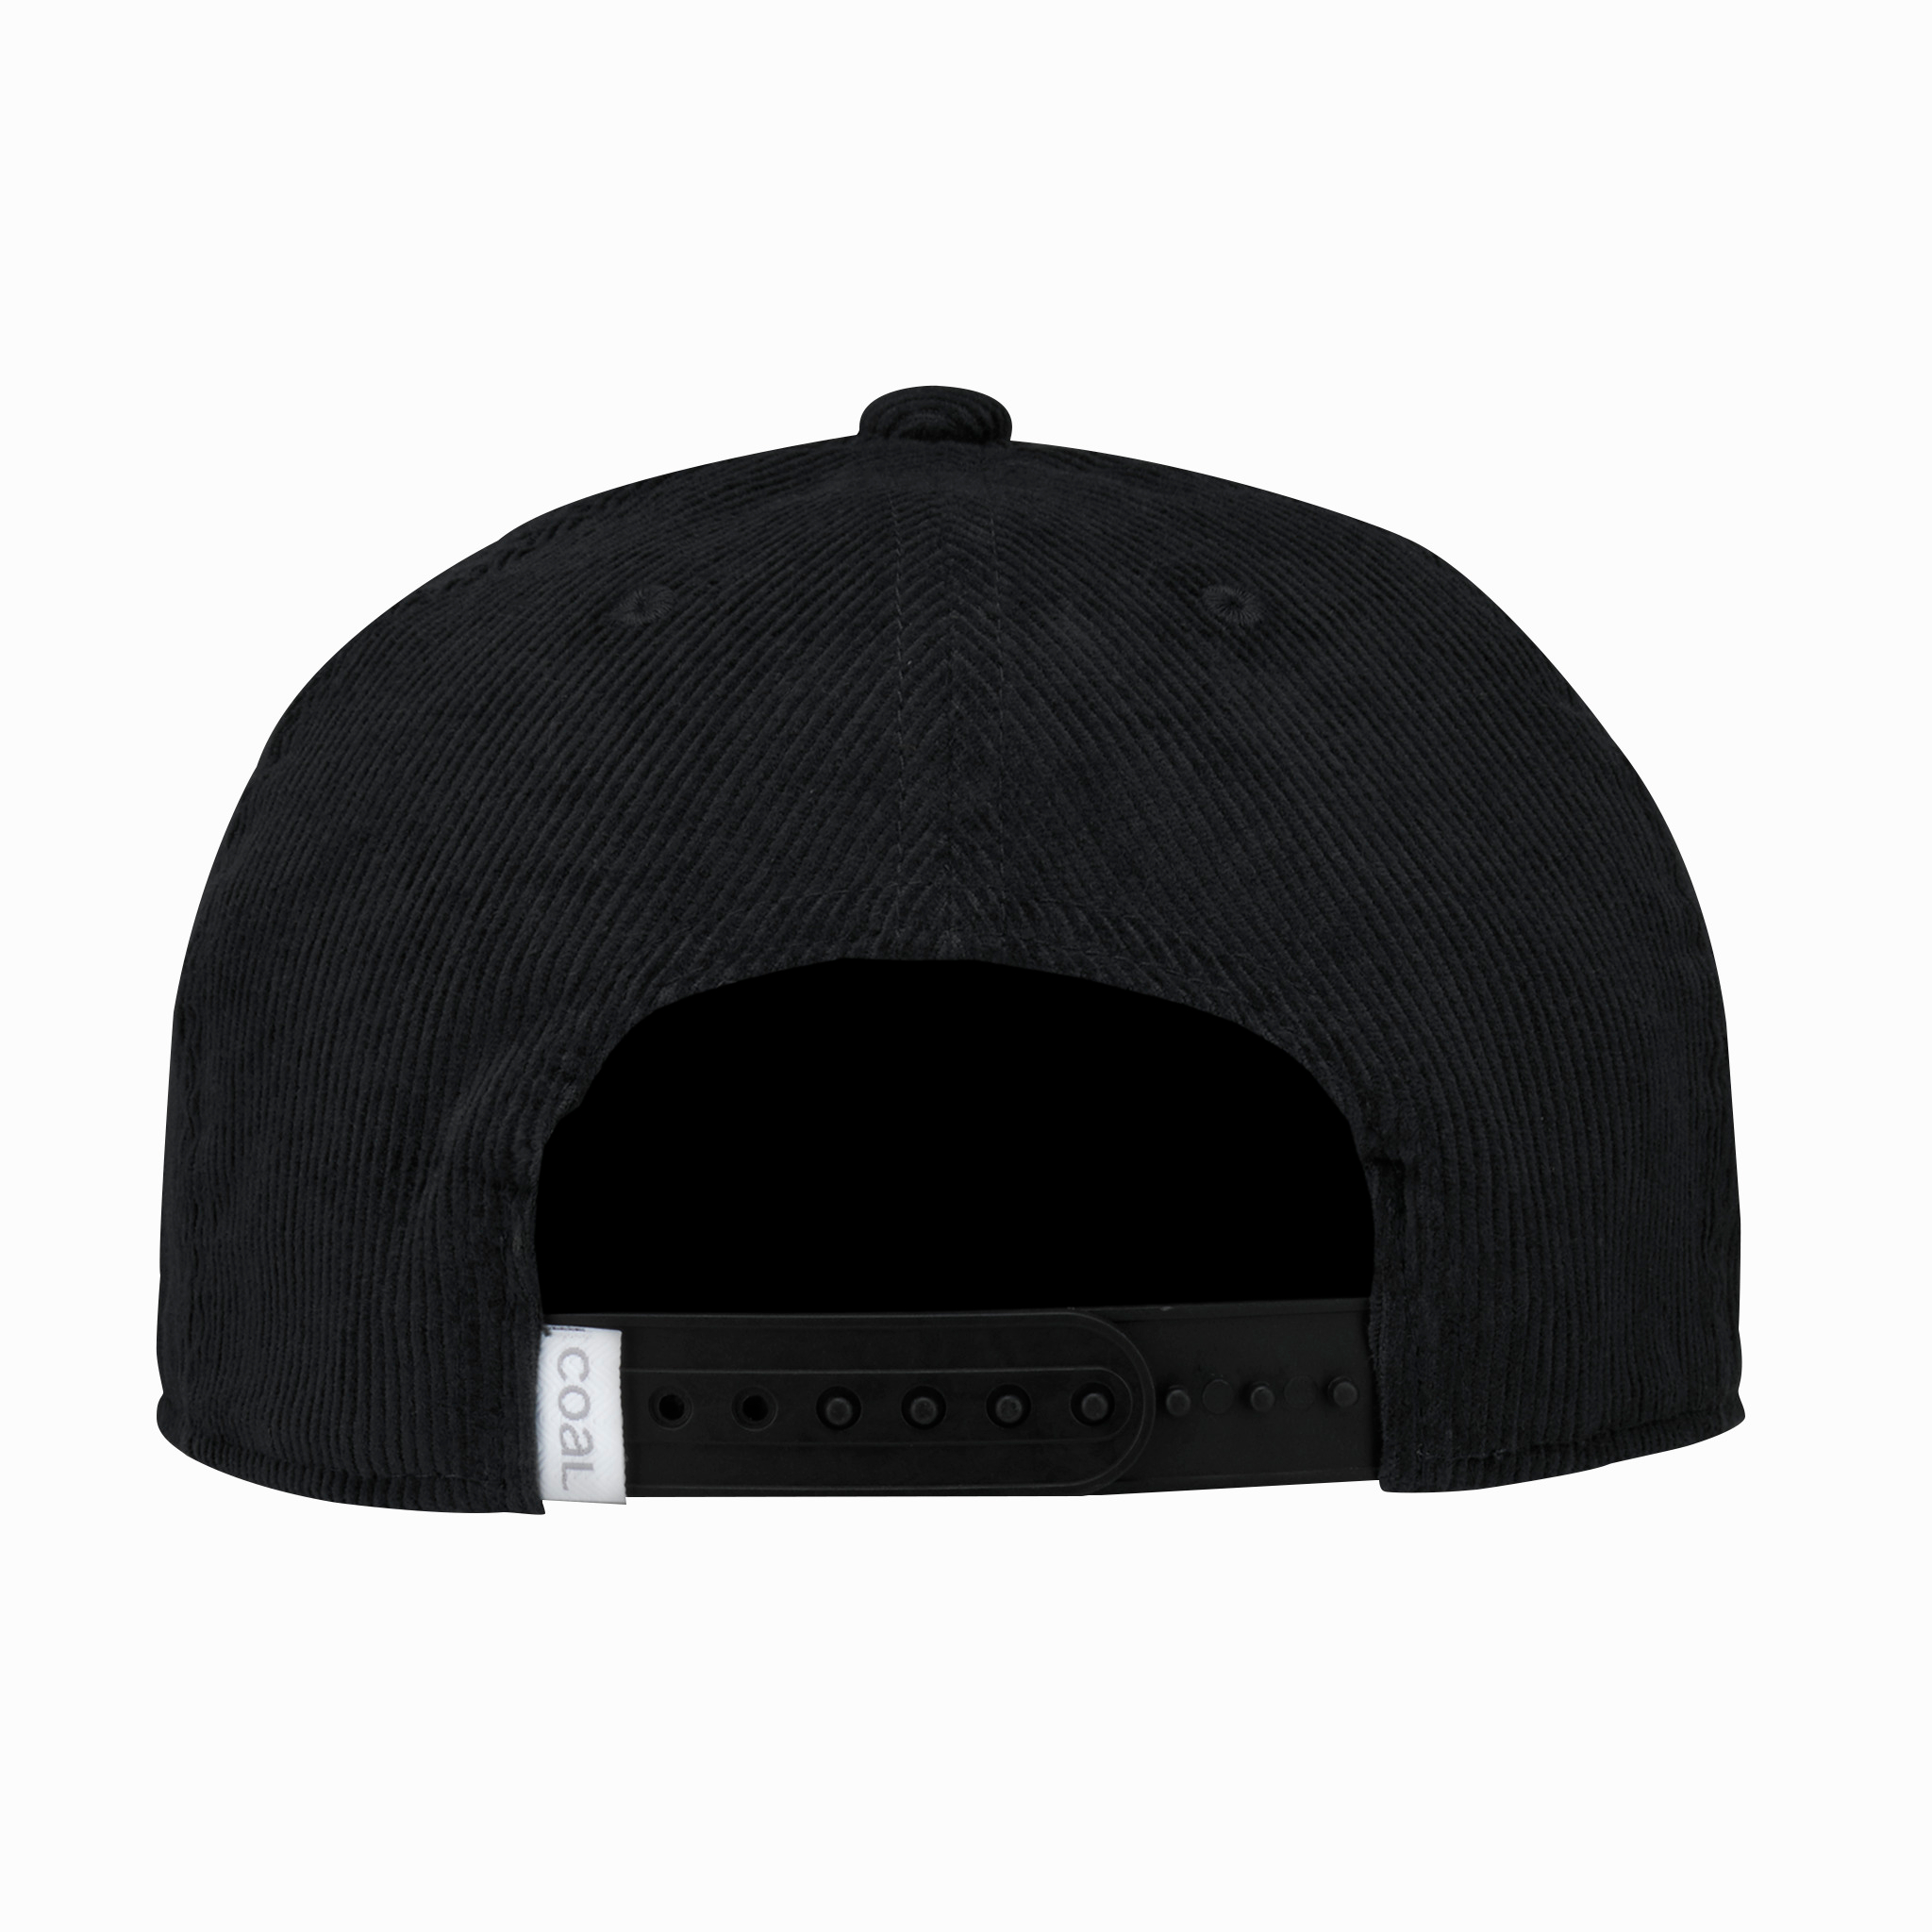 Coal The Wilderness Low Snapback Cap black One Size